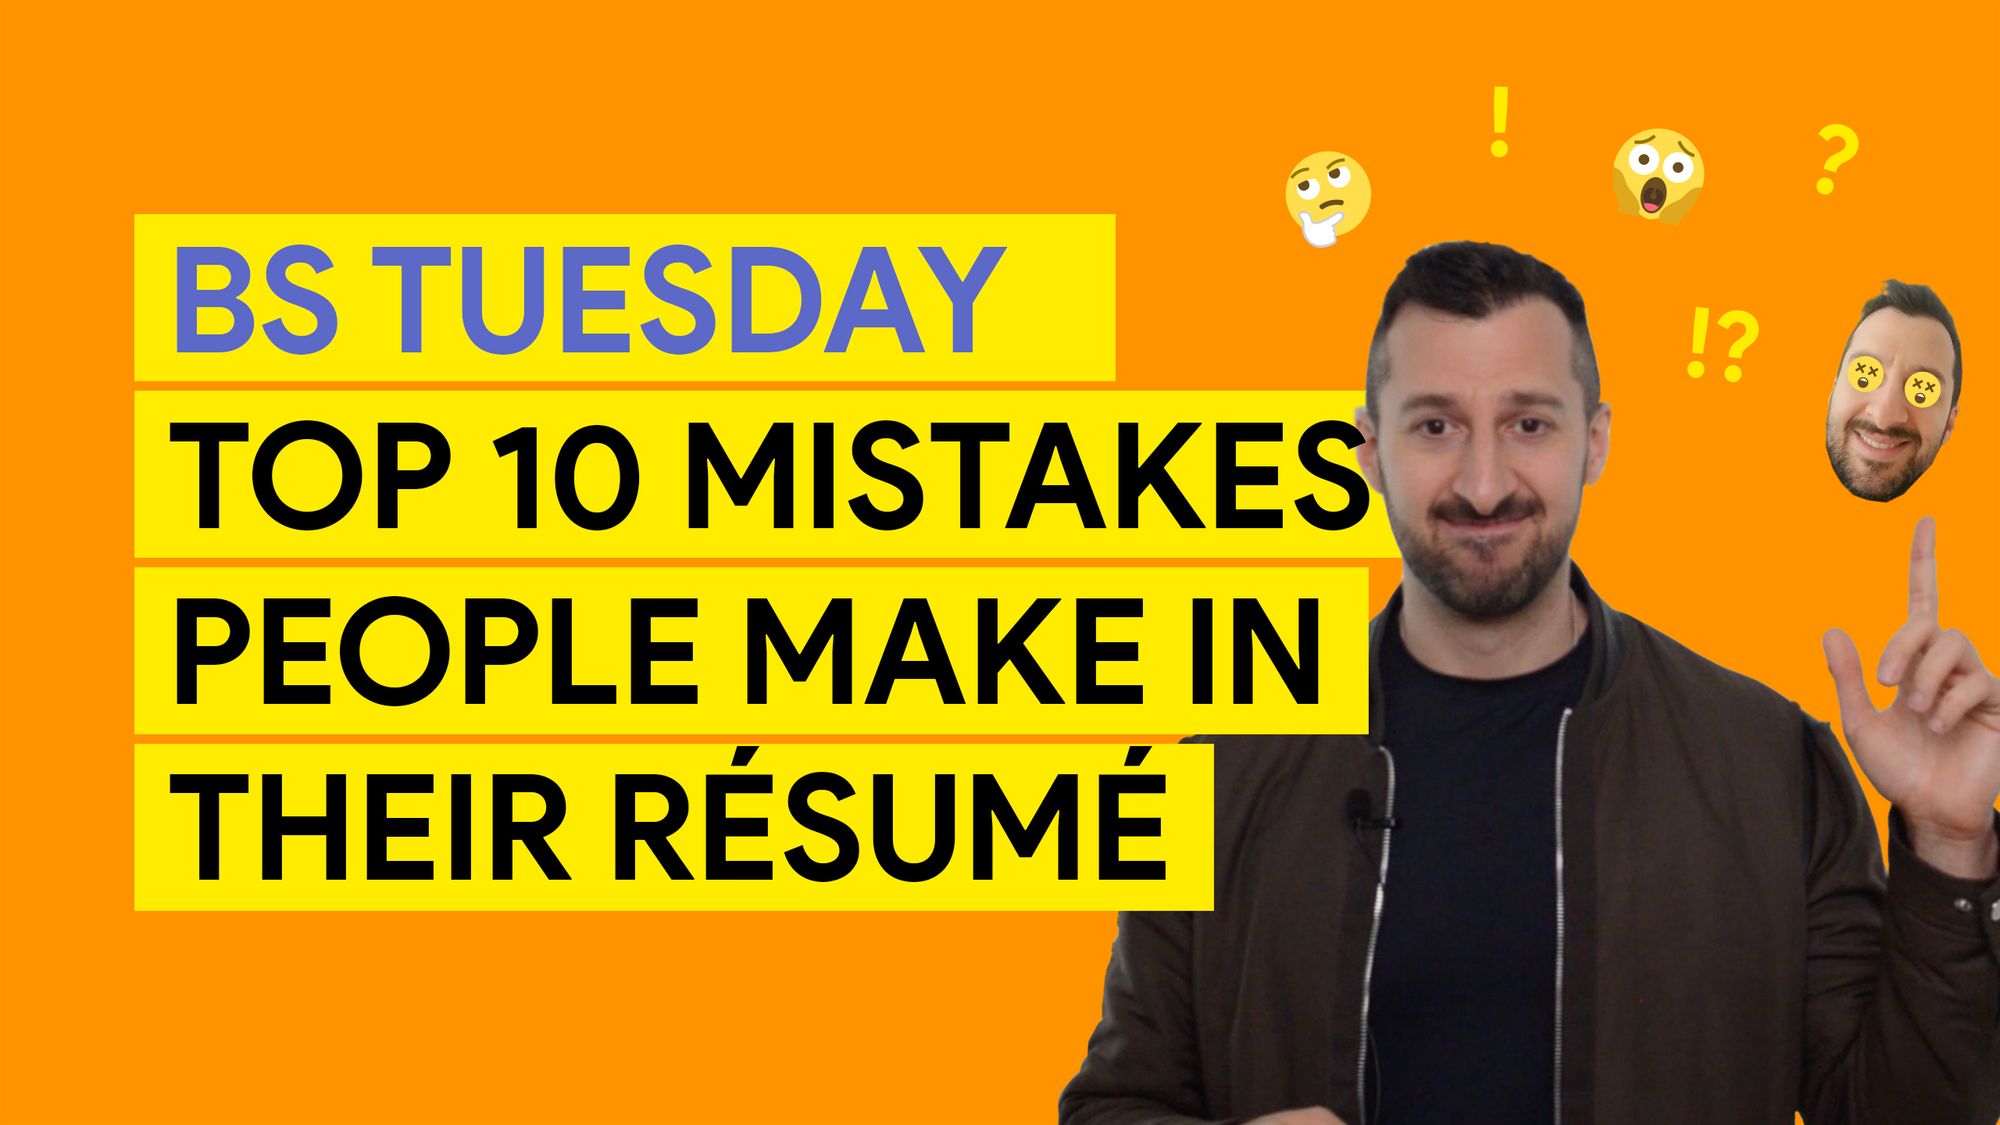 Top 10 mistakes people make in their résumé